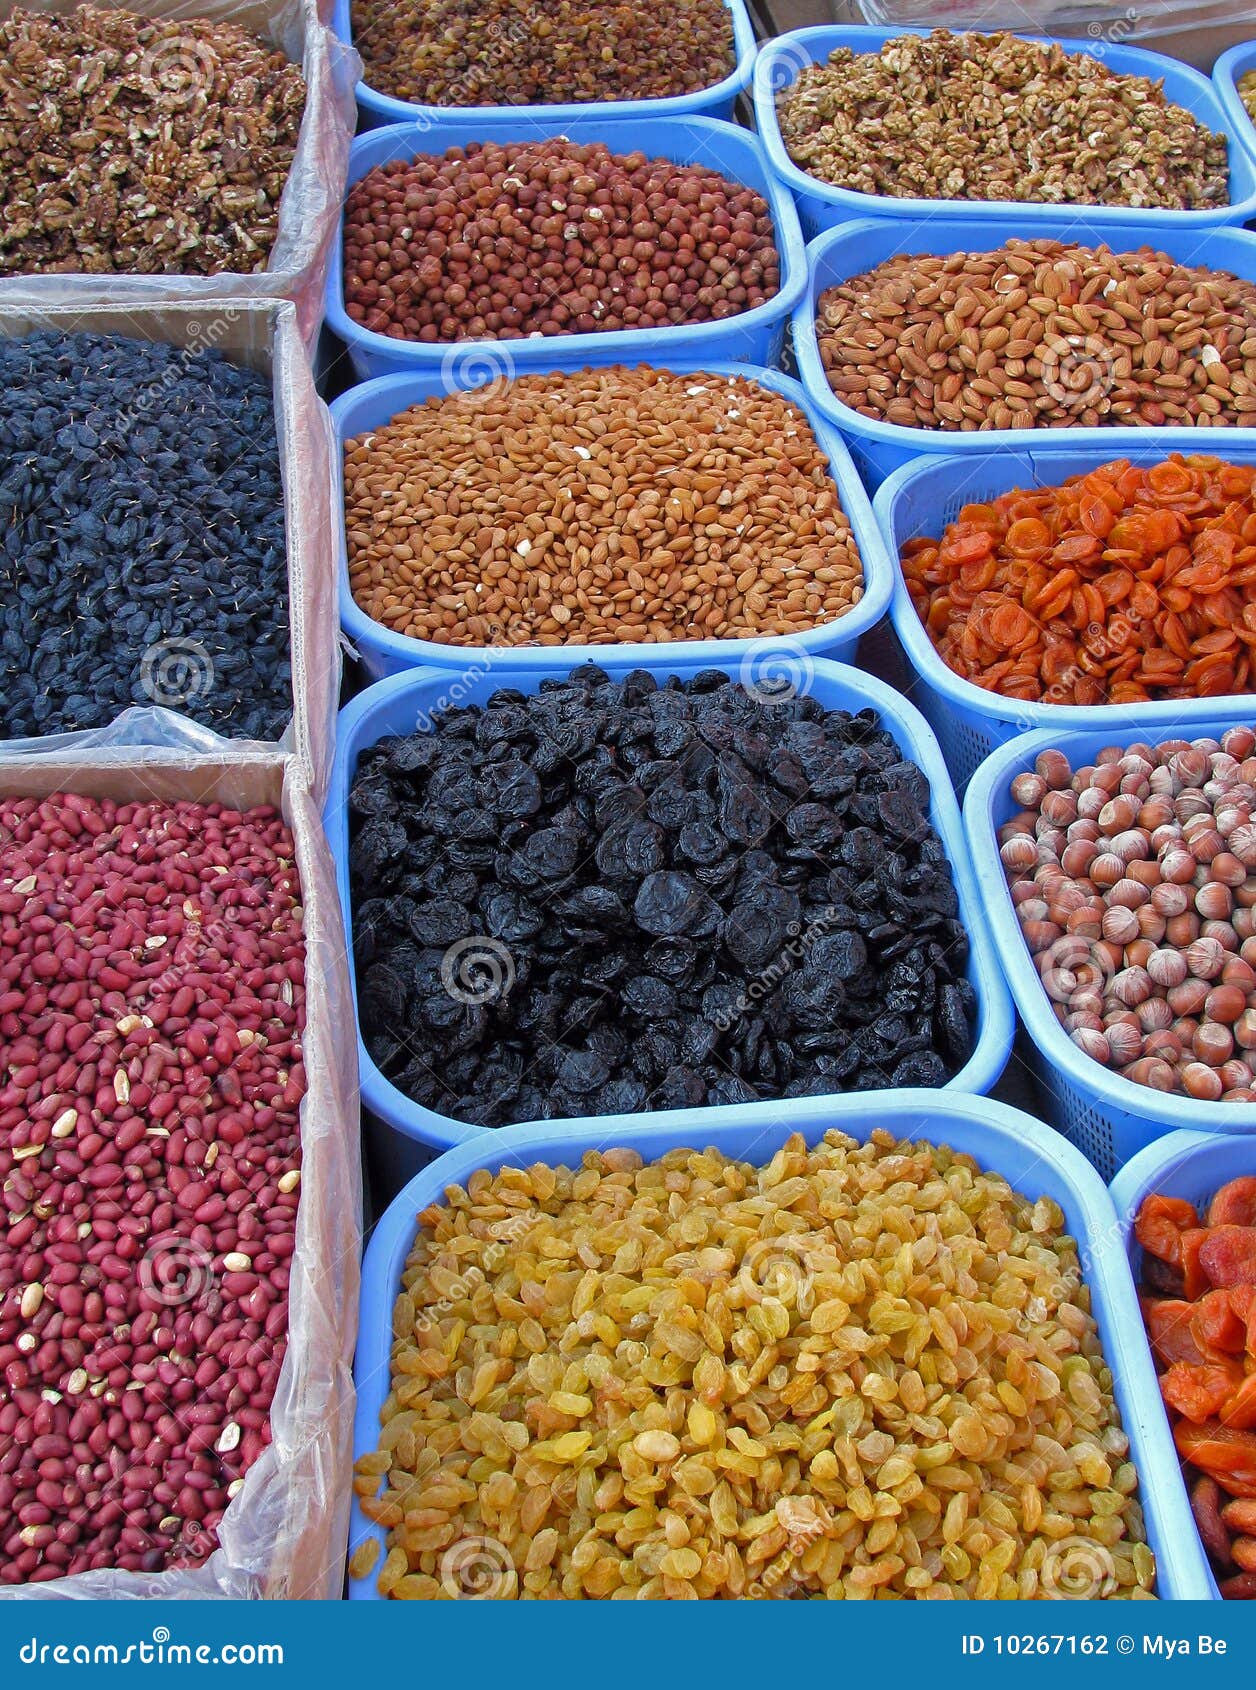 oriental bazaar objects - dry fruits and nuts